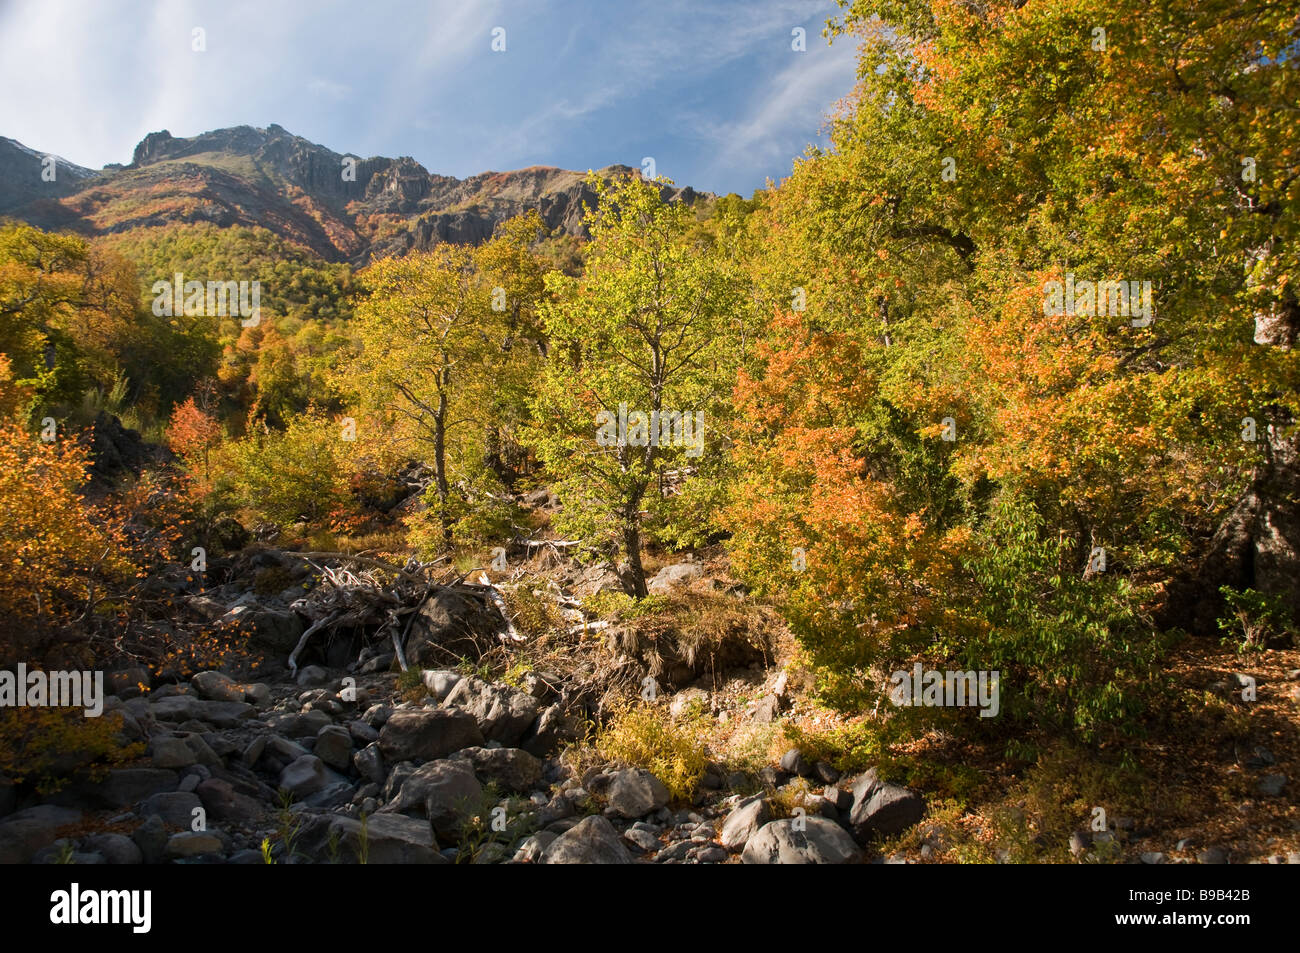 Forest of Southern Beeches (Nothofagus Macrocarpa)  in fall colors, autumn, Siete Tazas National Park, Chile Stock Photo